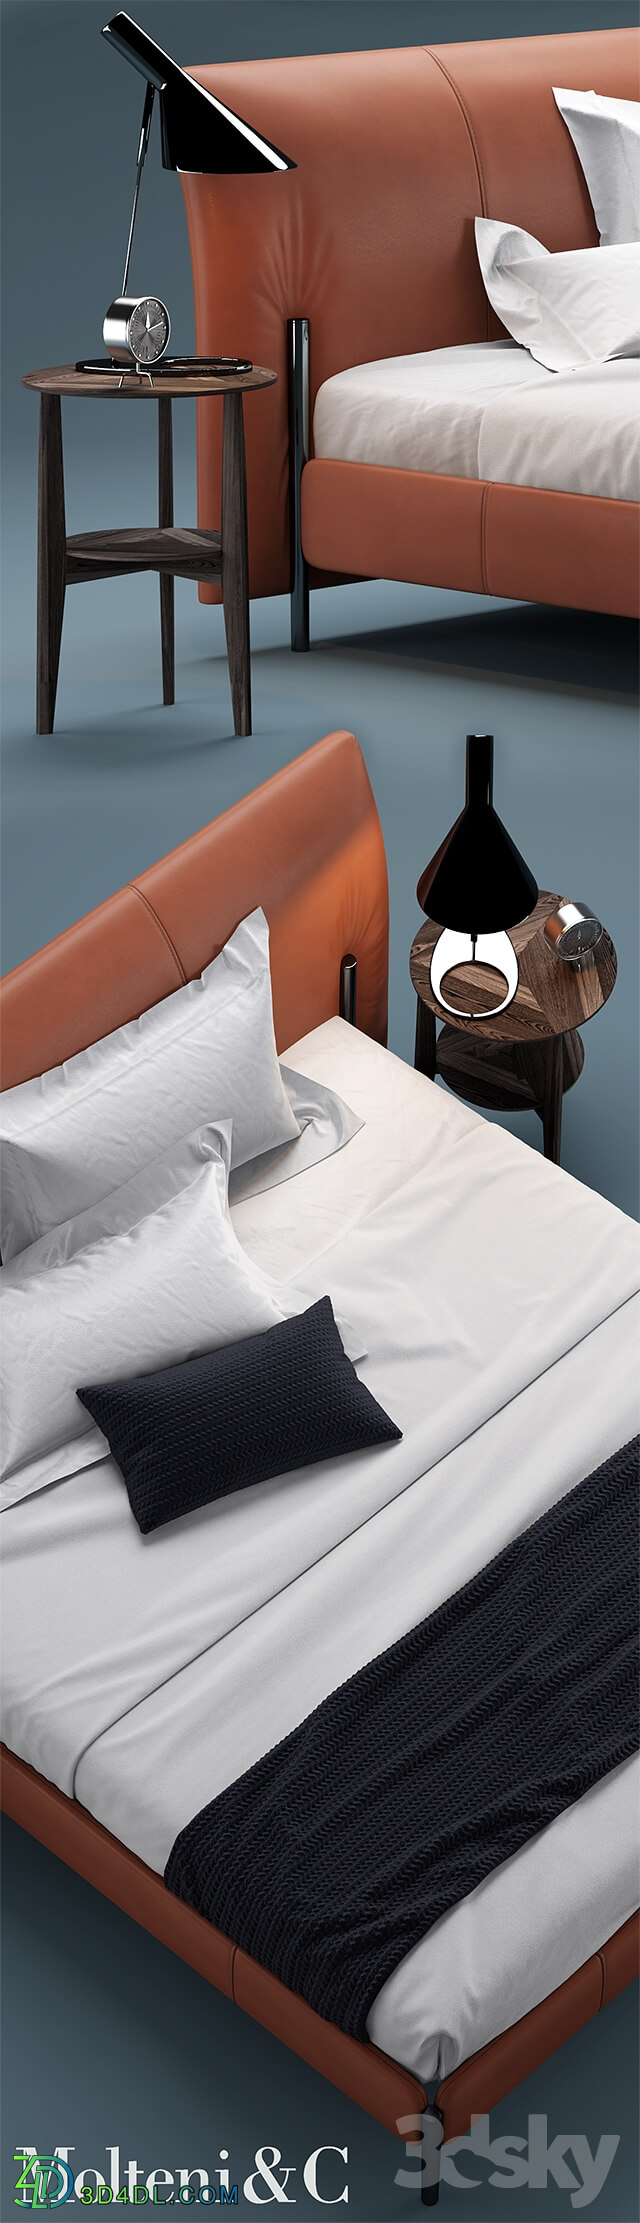 Bed - Bed molteni BEDS NICK